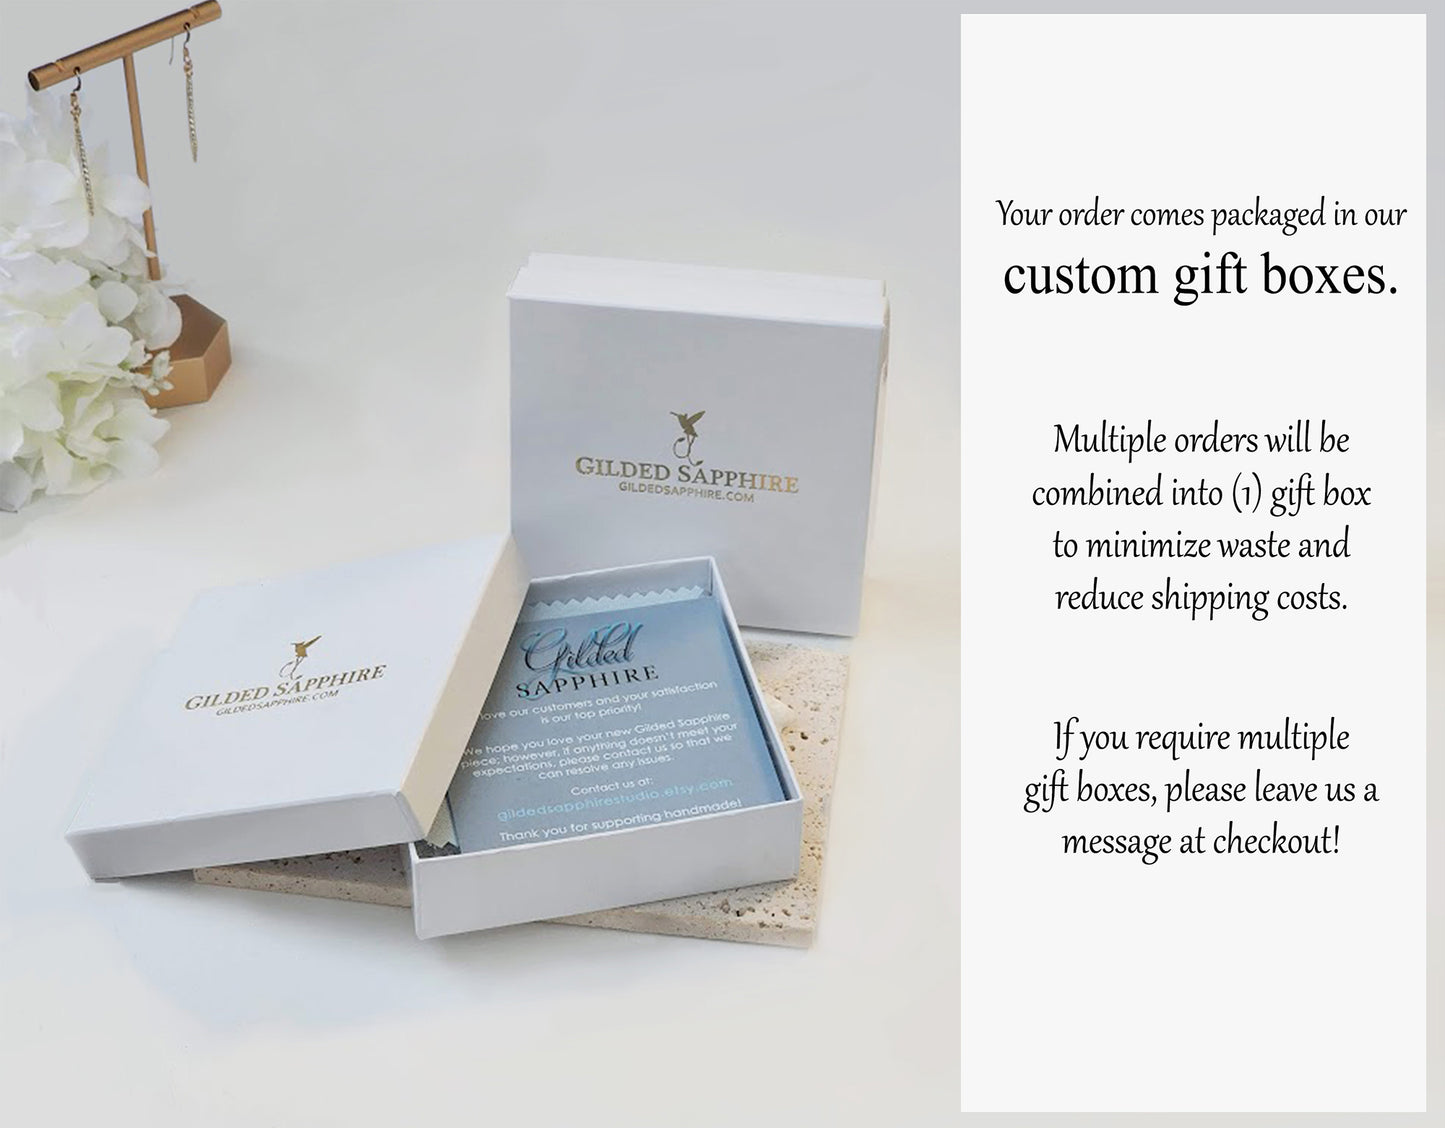 Gilded Sapphire custom jewelry shows their gift boxes and packaging with text that explains that if you need multiple gift boxes with your order you should message the company.